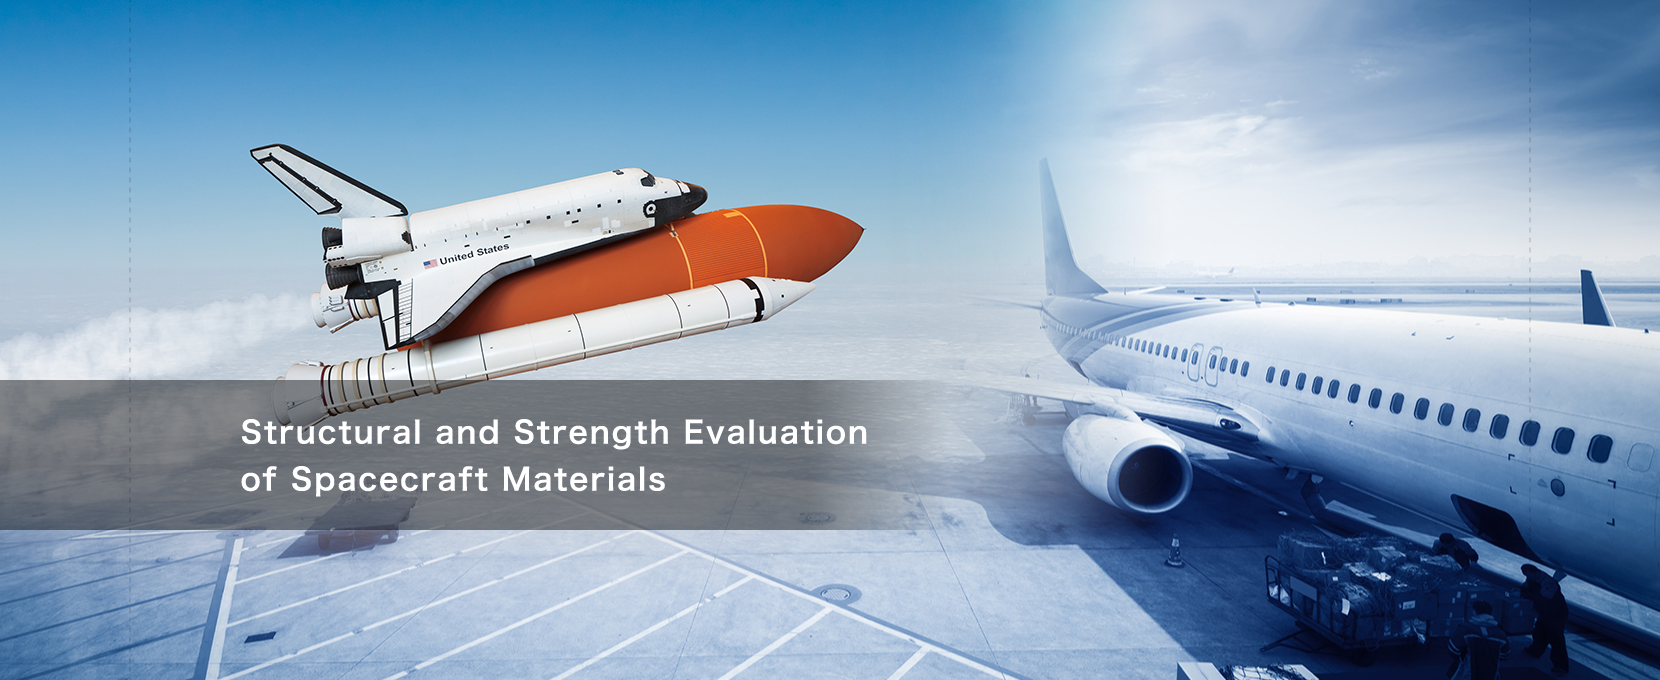 Structural and Strength Evaluation of Spacecraft Materials